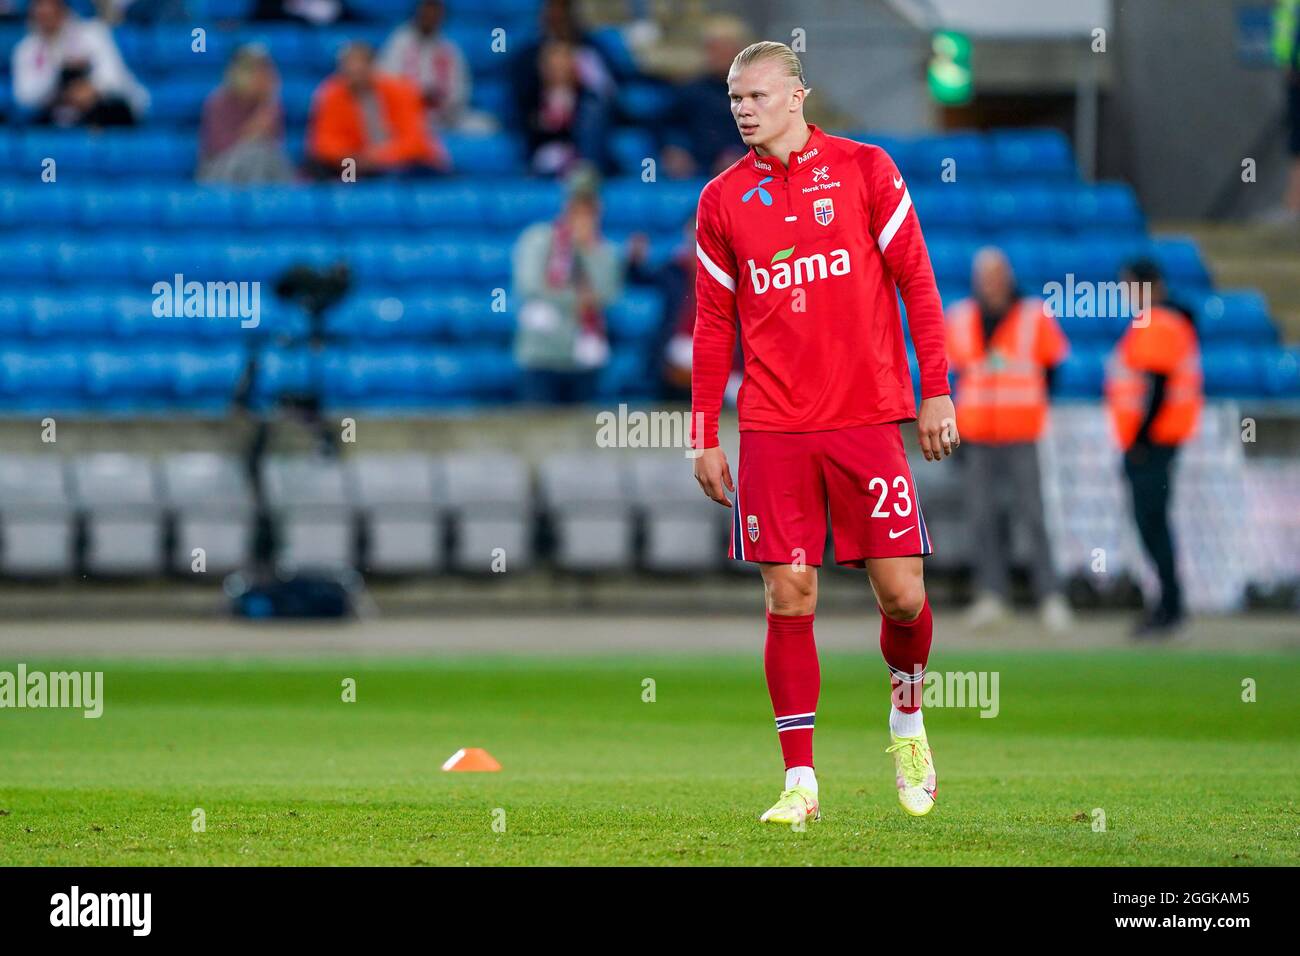 OSLO, NORWAY - SEPTEMBER 1: Erling Haaland of Norway during the World Cup Qualifier match between Norway and Netherlands at Ullevaal Stadium on September 1, 2021 in Oslo, Norway (Photo by Andre Weening/Orange Pictures) Stock Photo